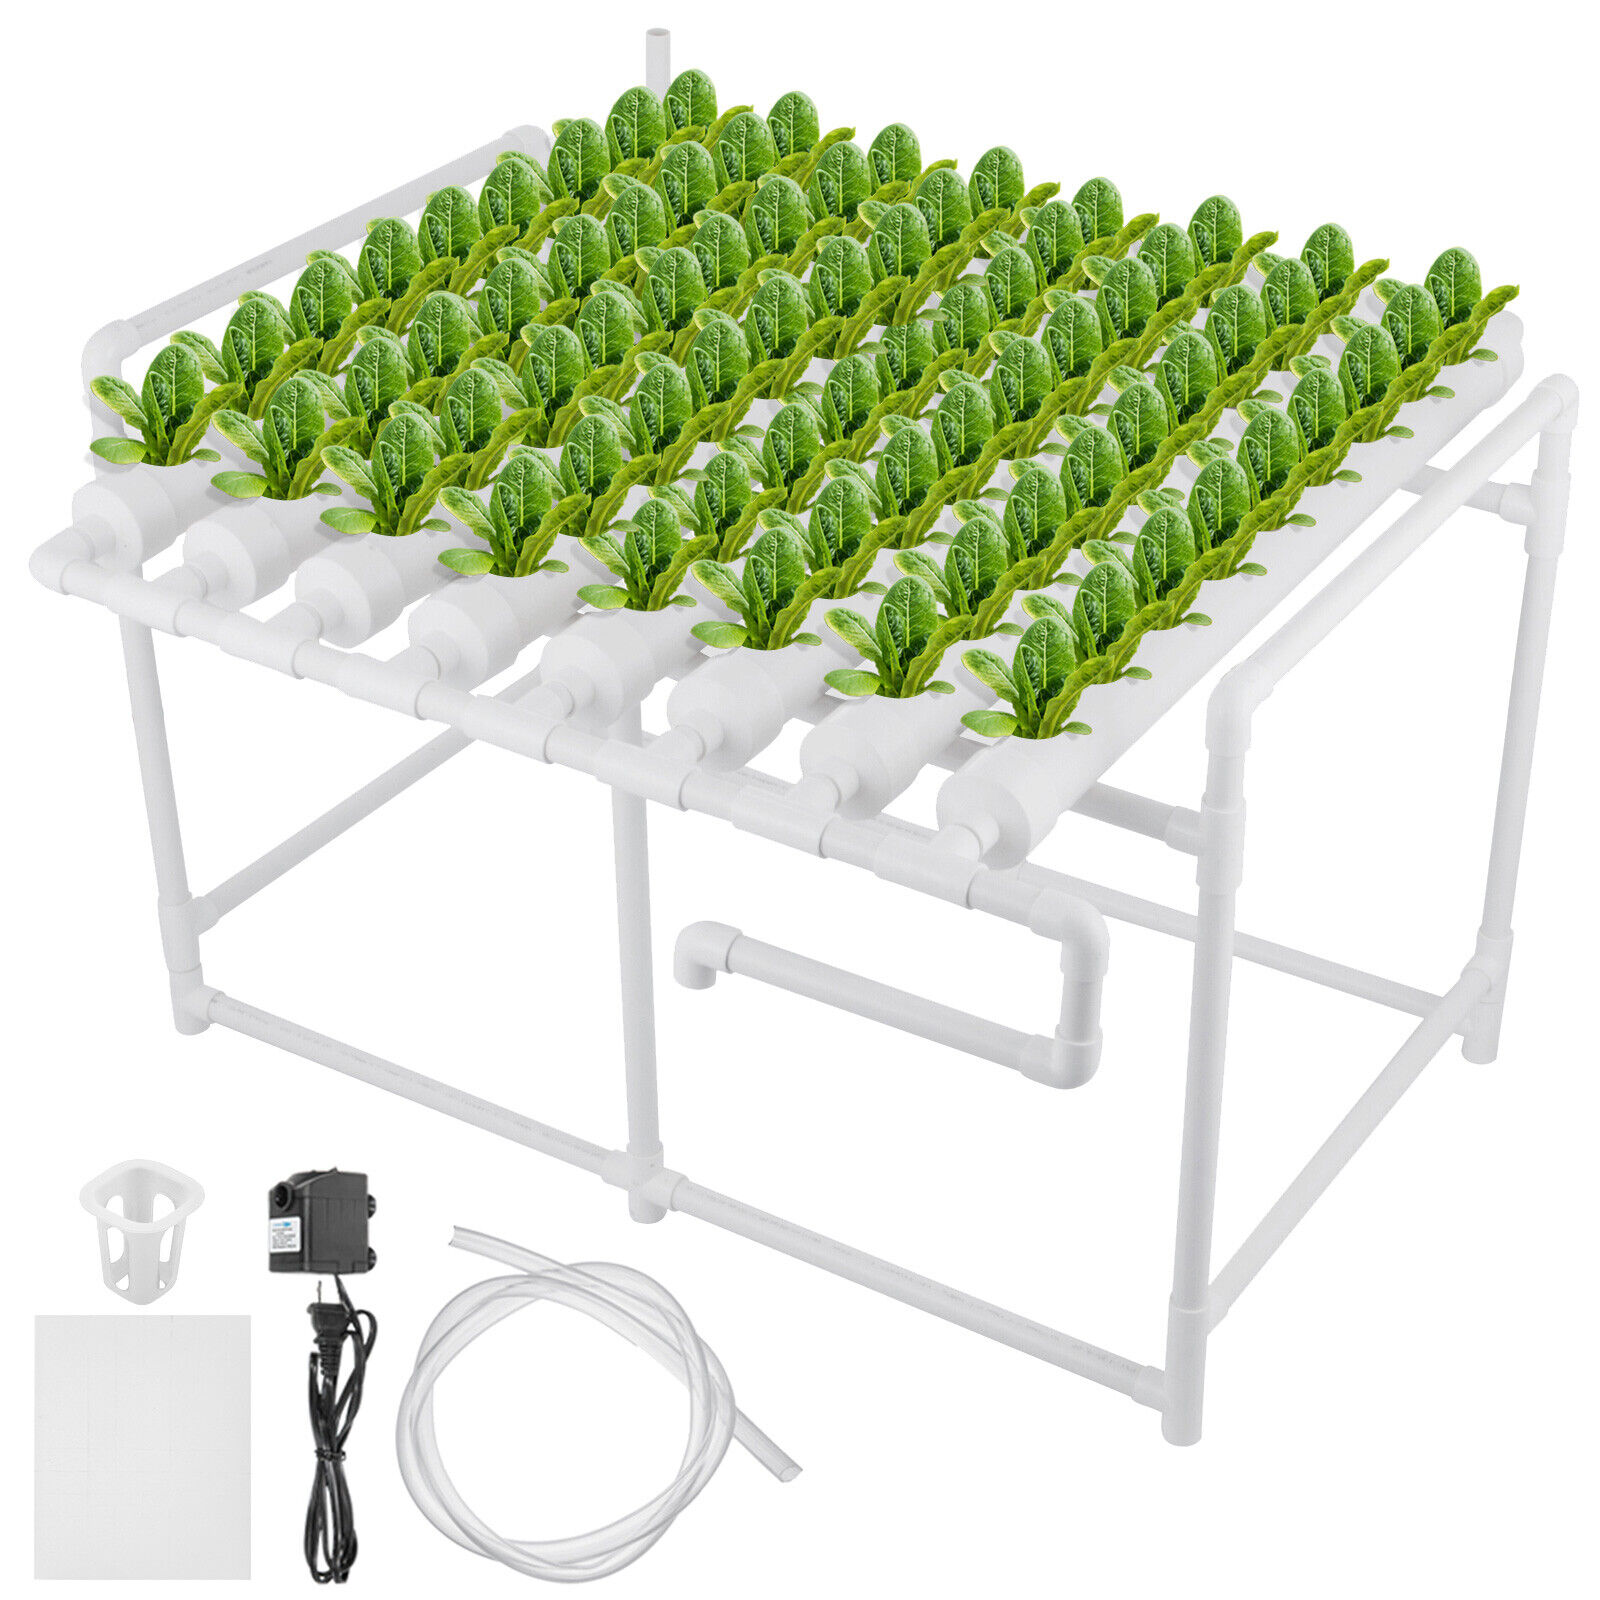 Hydroponic Site Grow Kit 72 Planting Site Deep Water Culture Garden System Plant